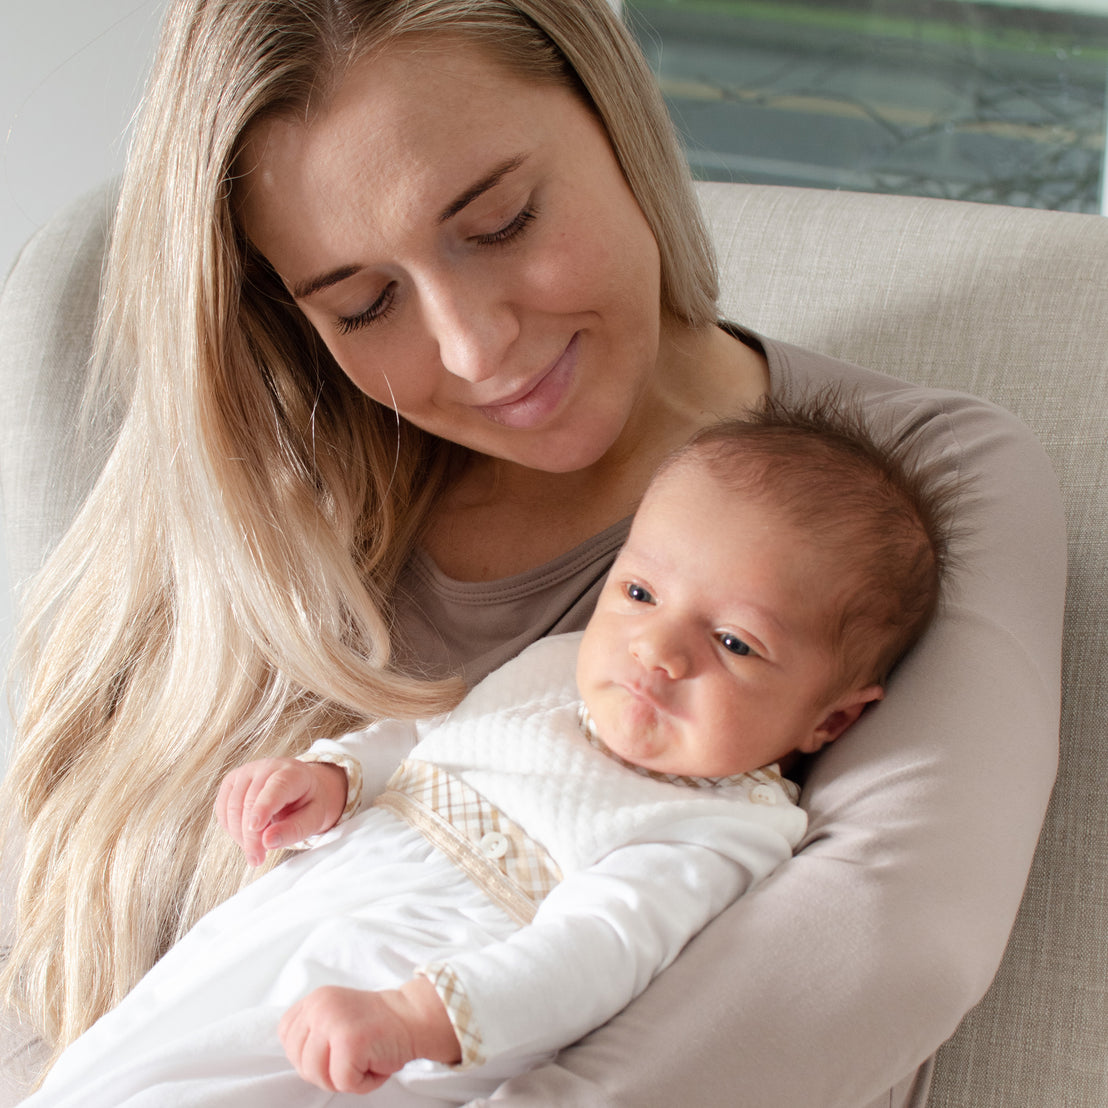 A serene mother with blonde hair smiling gently while cradling her baby boy her arms, seated in a comfortable chair. The baby gazes back.